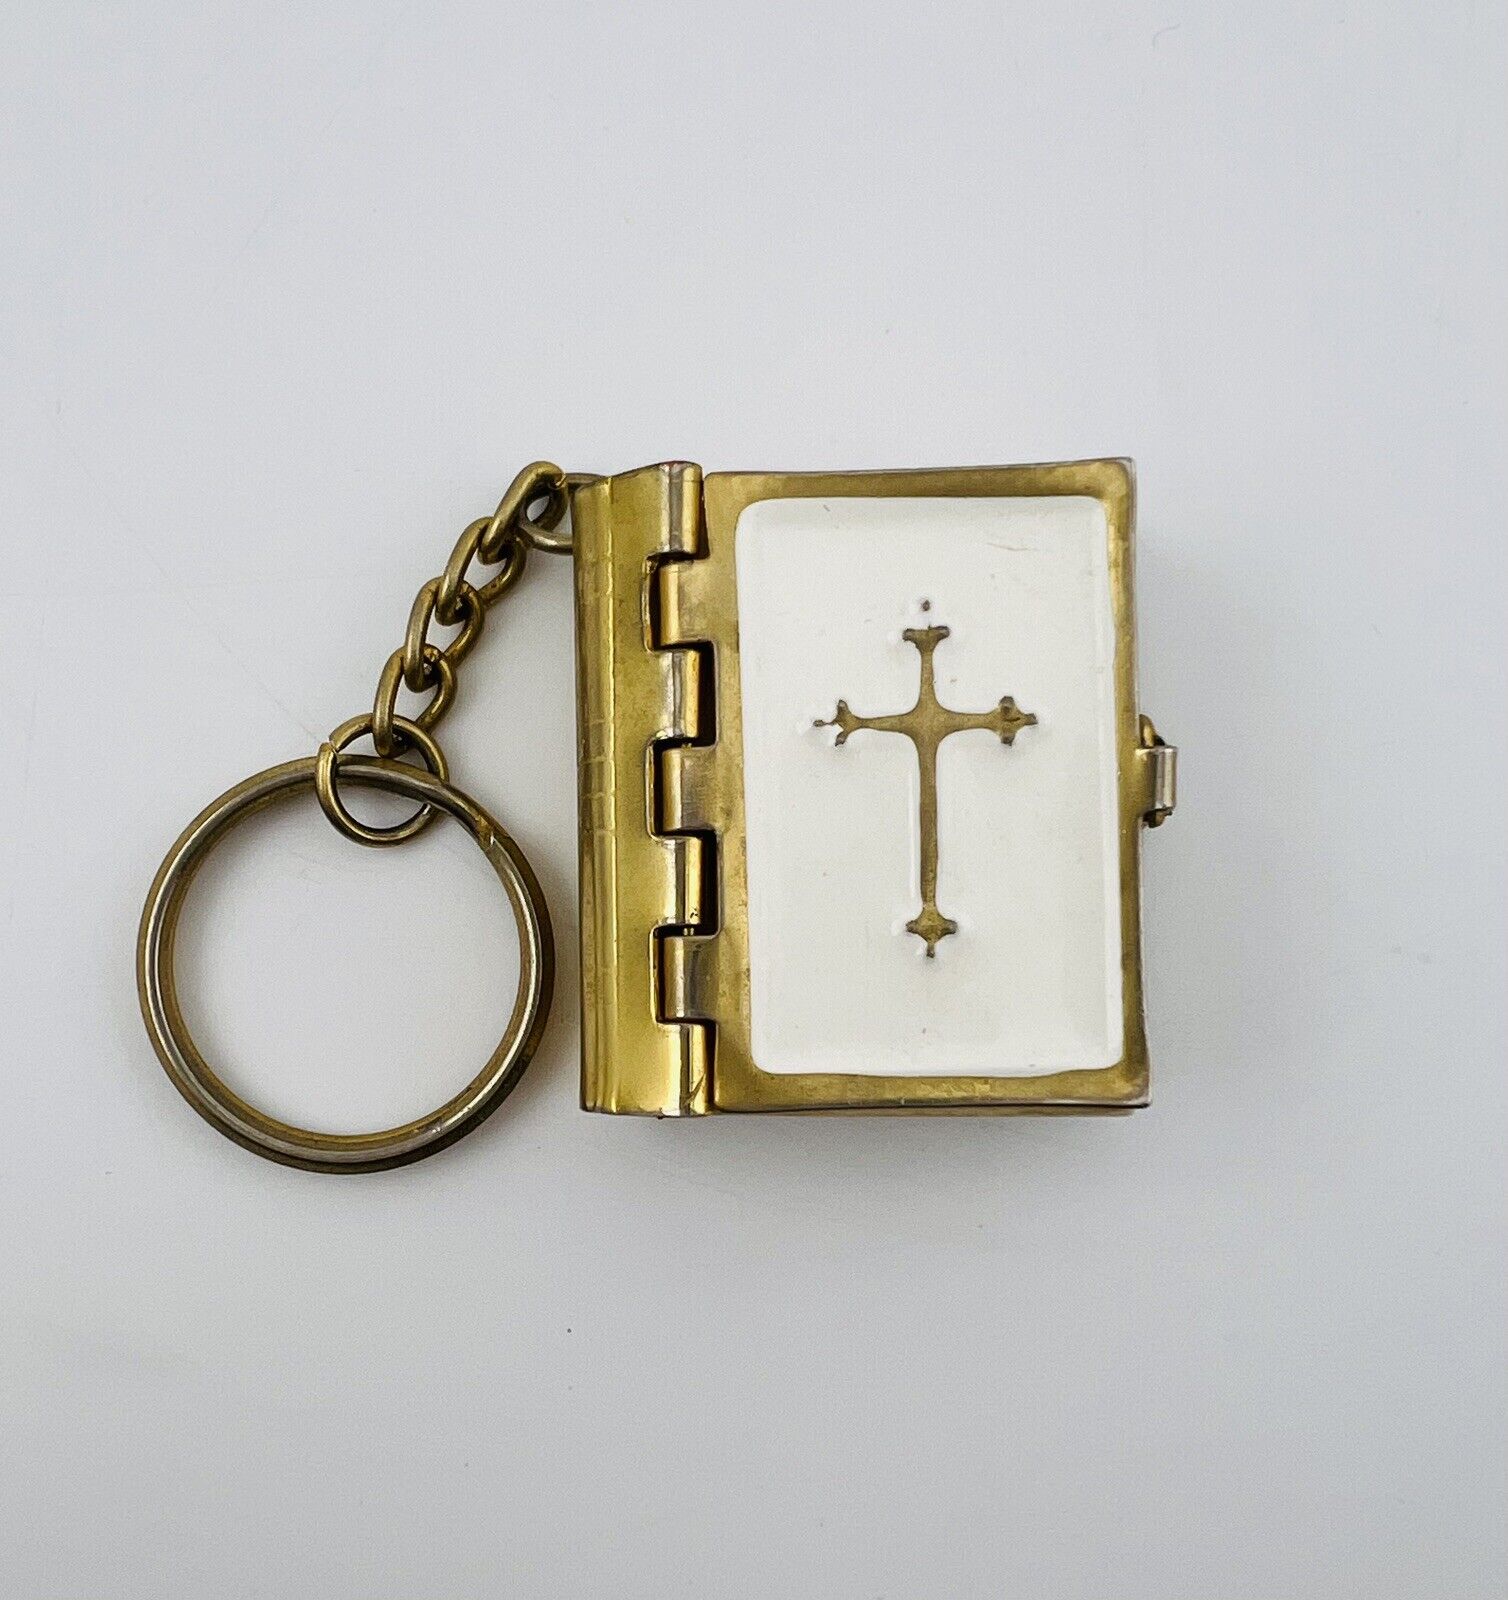 Vintage Micro Mini Real Smallest Bible New Testament Gold Metal Keychain